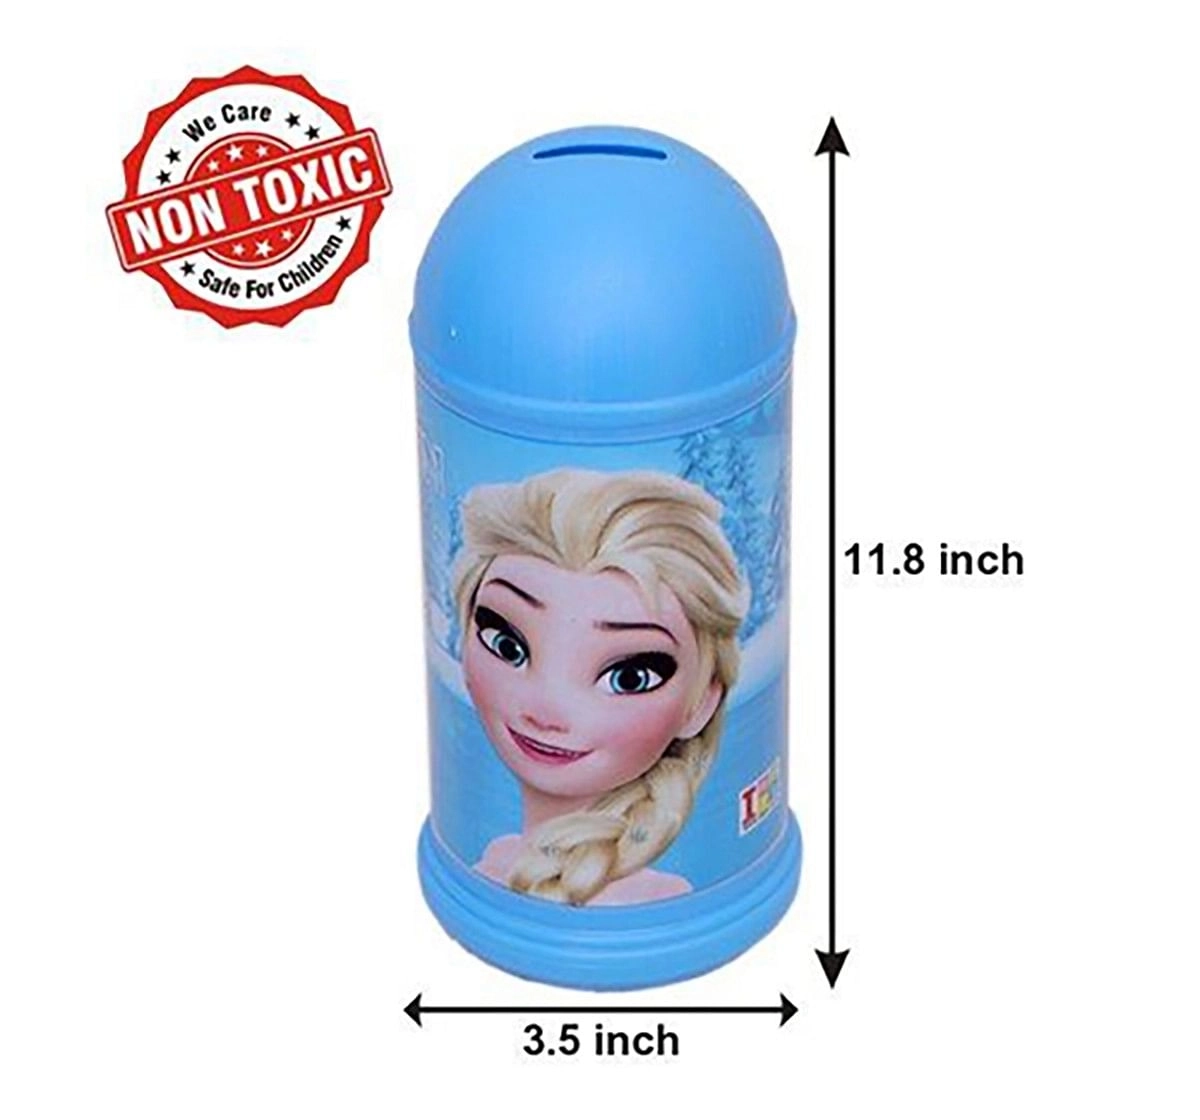 IToys Disney Frozen Coin Bank Novelty for Kids Age 4Y+